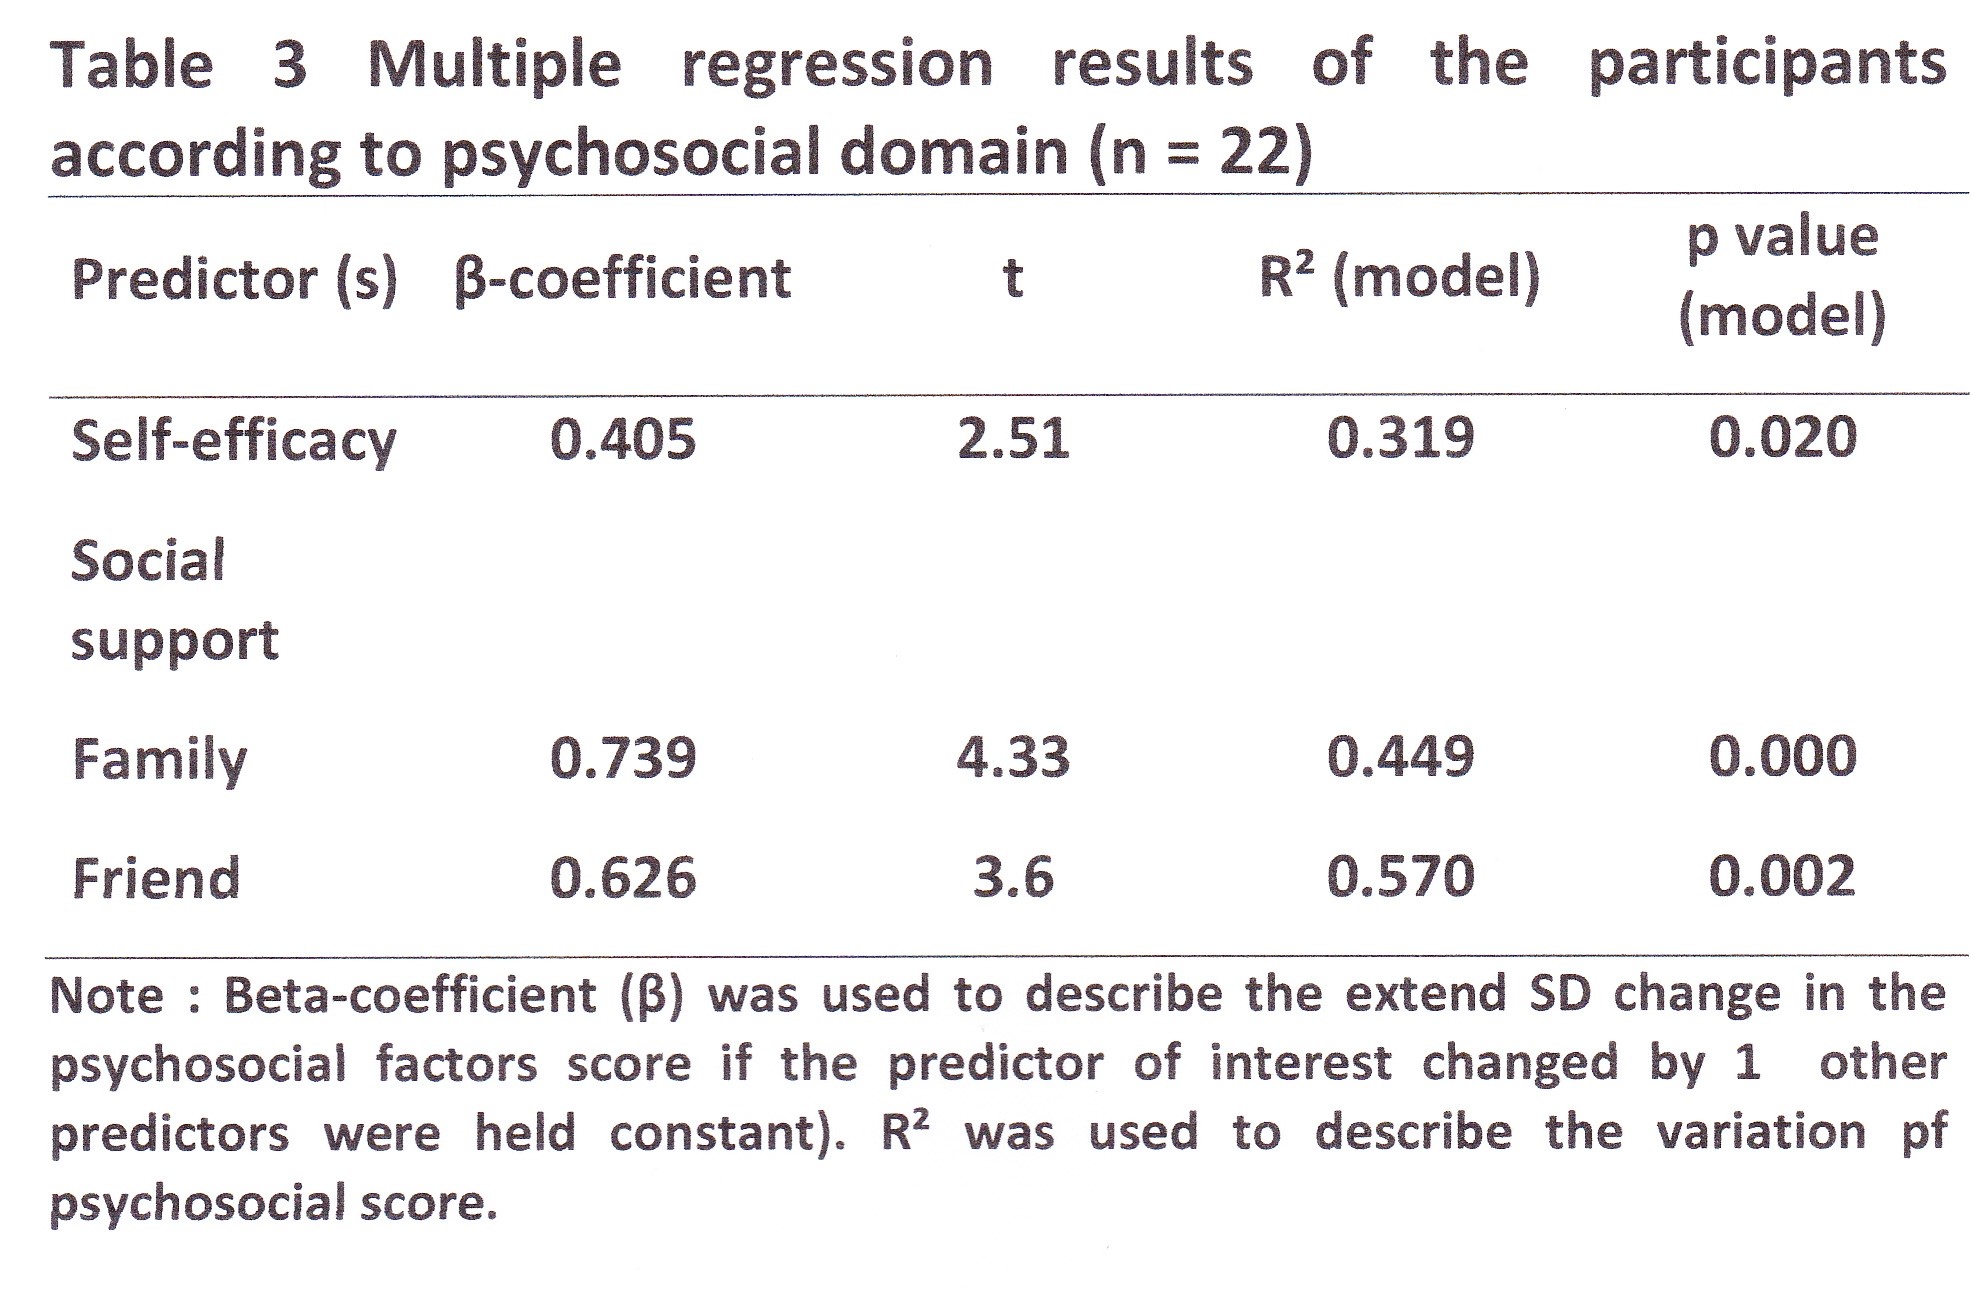 Multiple regression results of the participants according to psychosocial domain (n = 22).